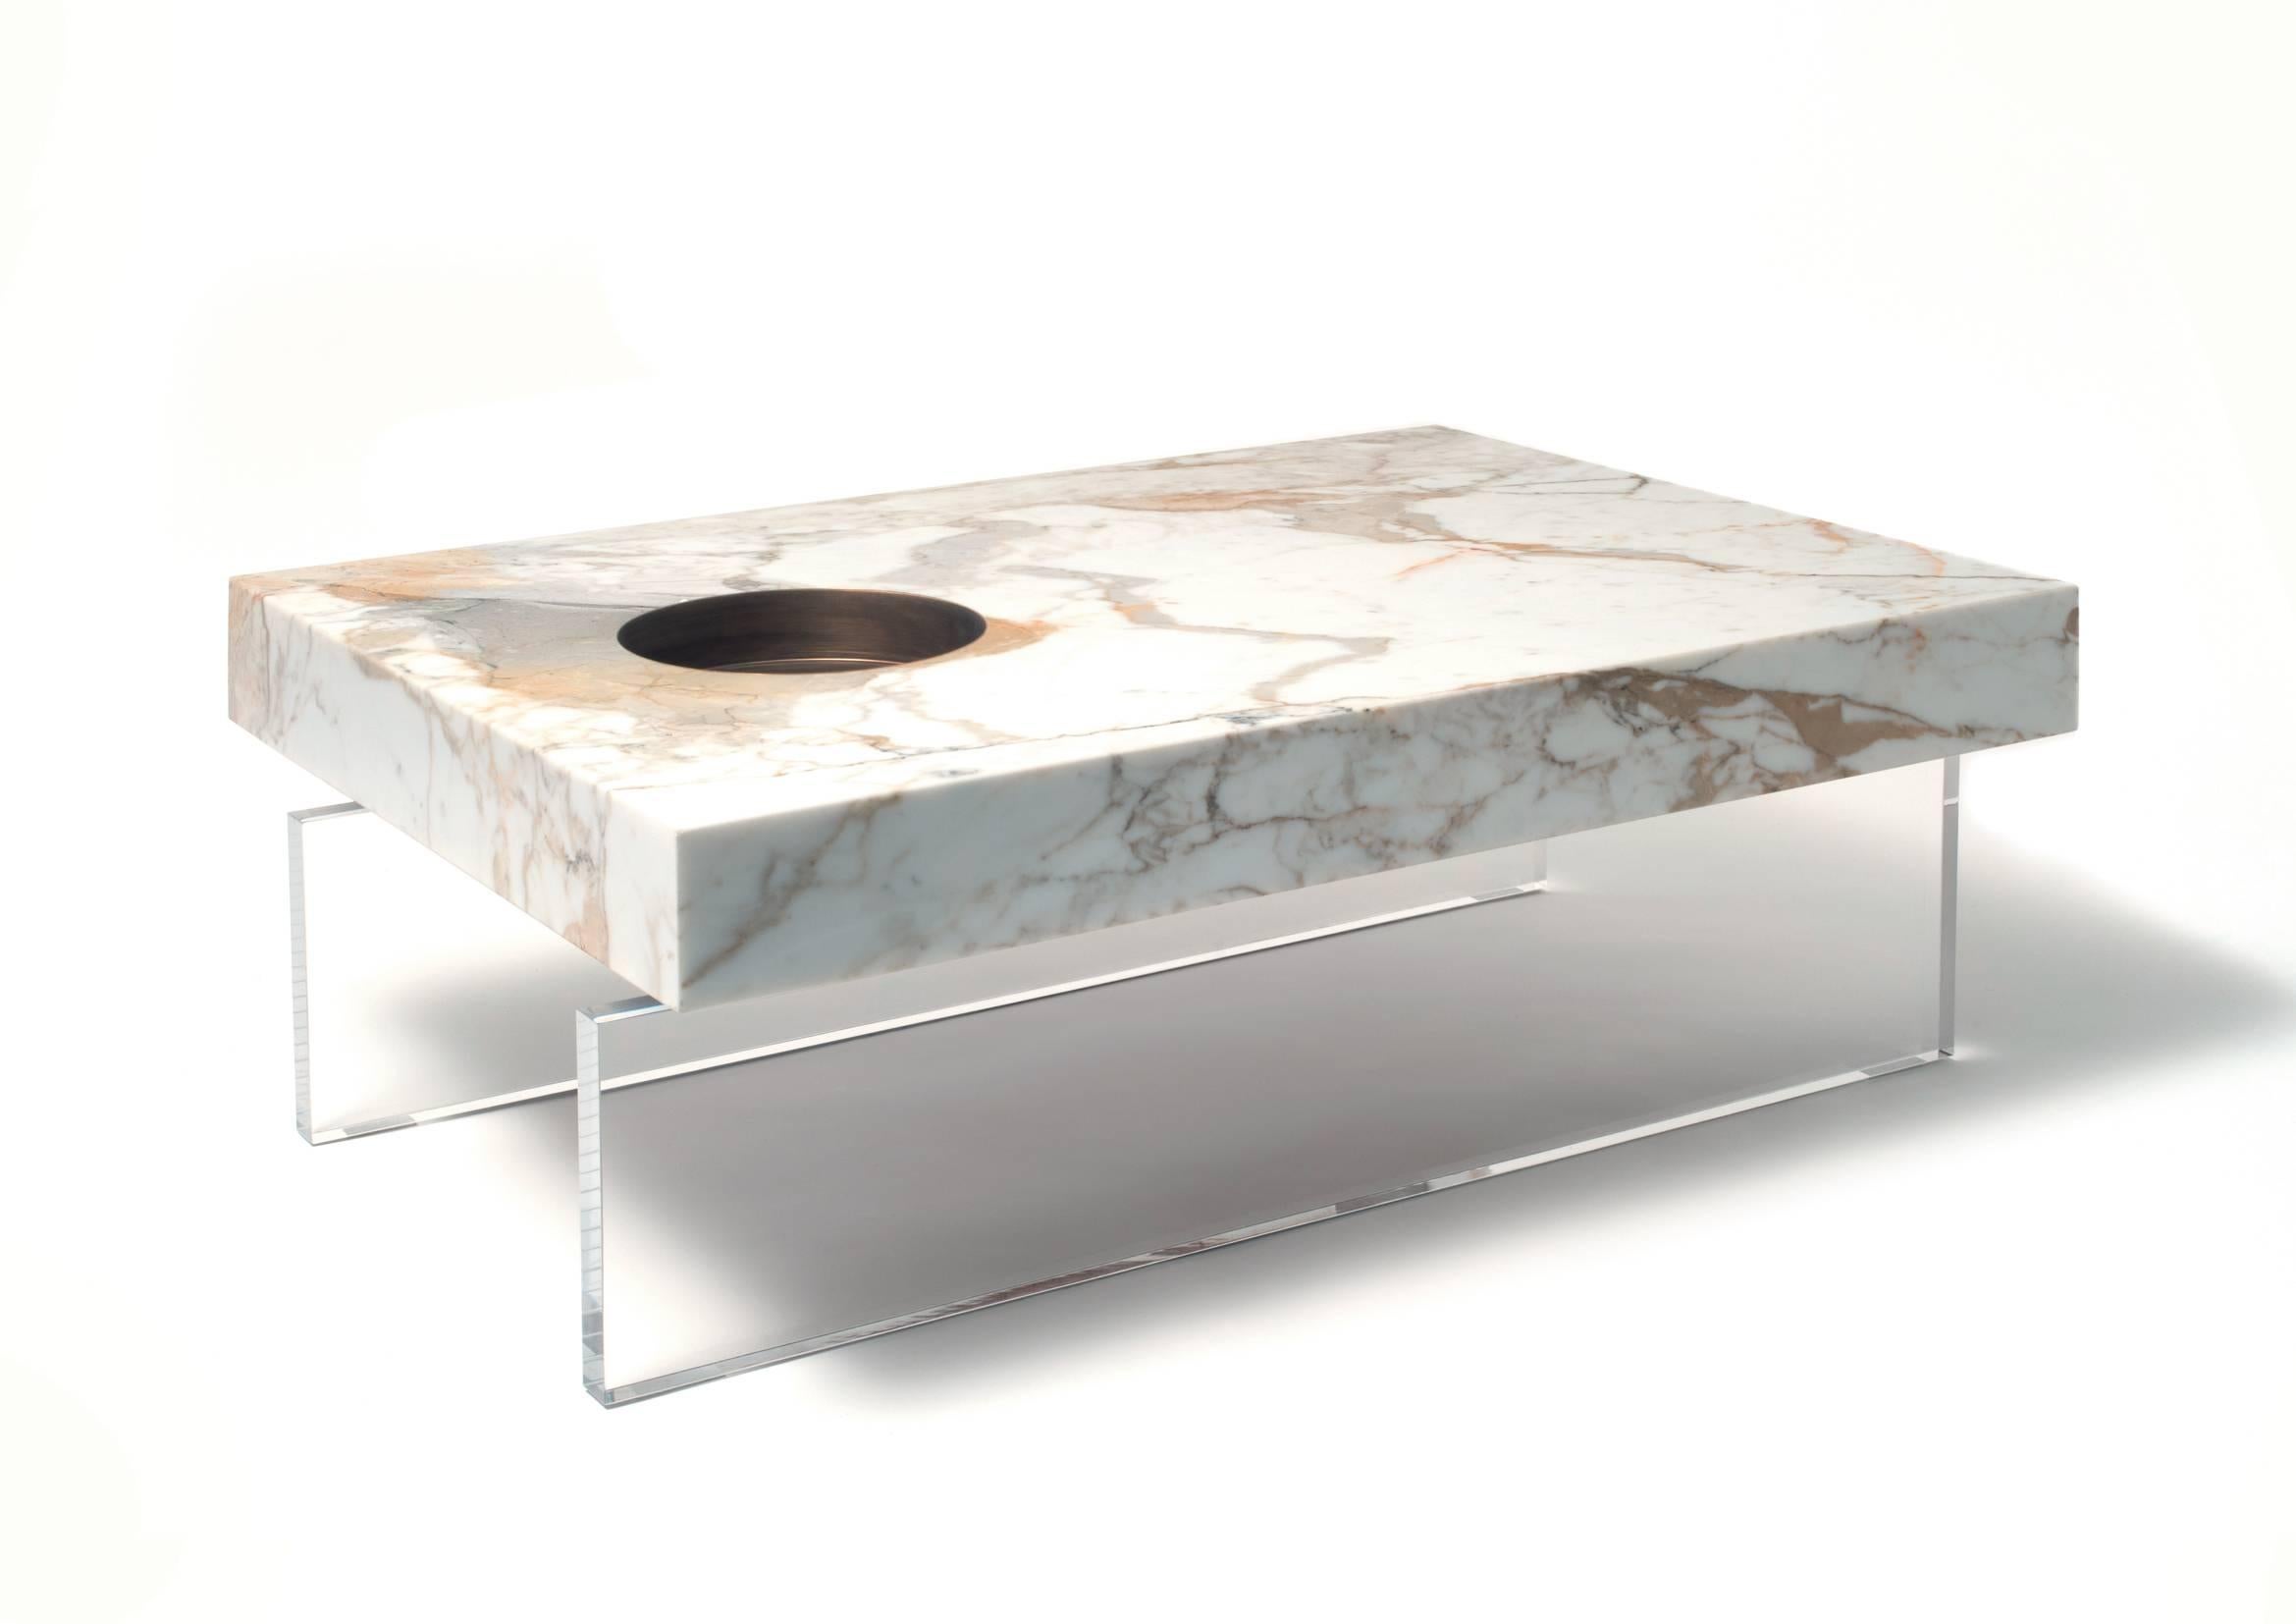 What we observe is often deceiving, it conceals itself and avoids being truly seen. Belingardi Clusoni demands a coffee table that regards us and lets itself be regarded, a silent eye that knows how to welcome and bestow. A marble plane in Calacatta